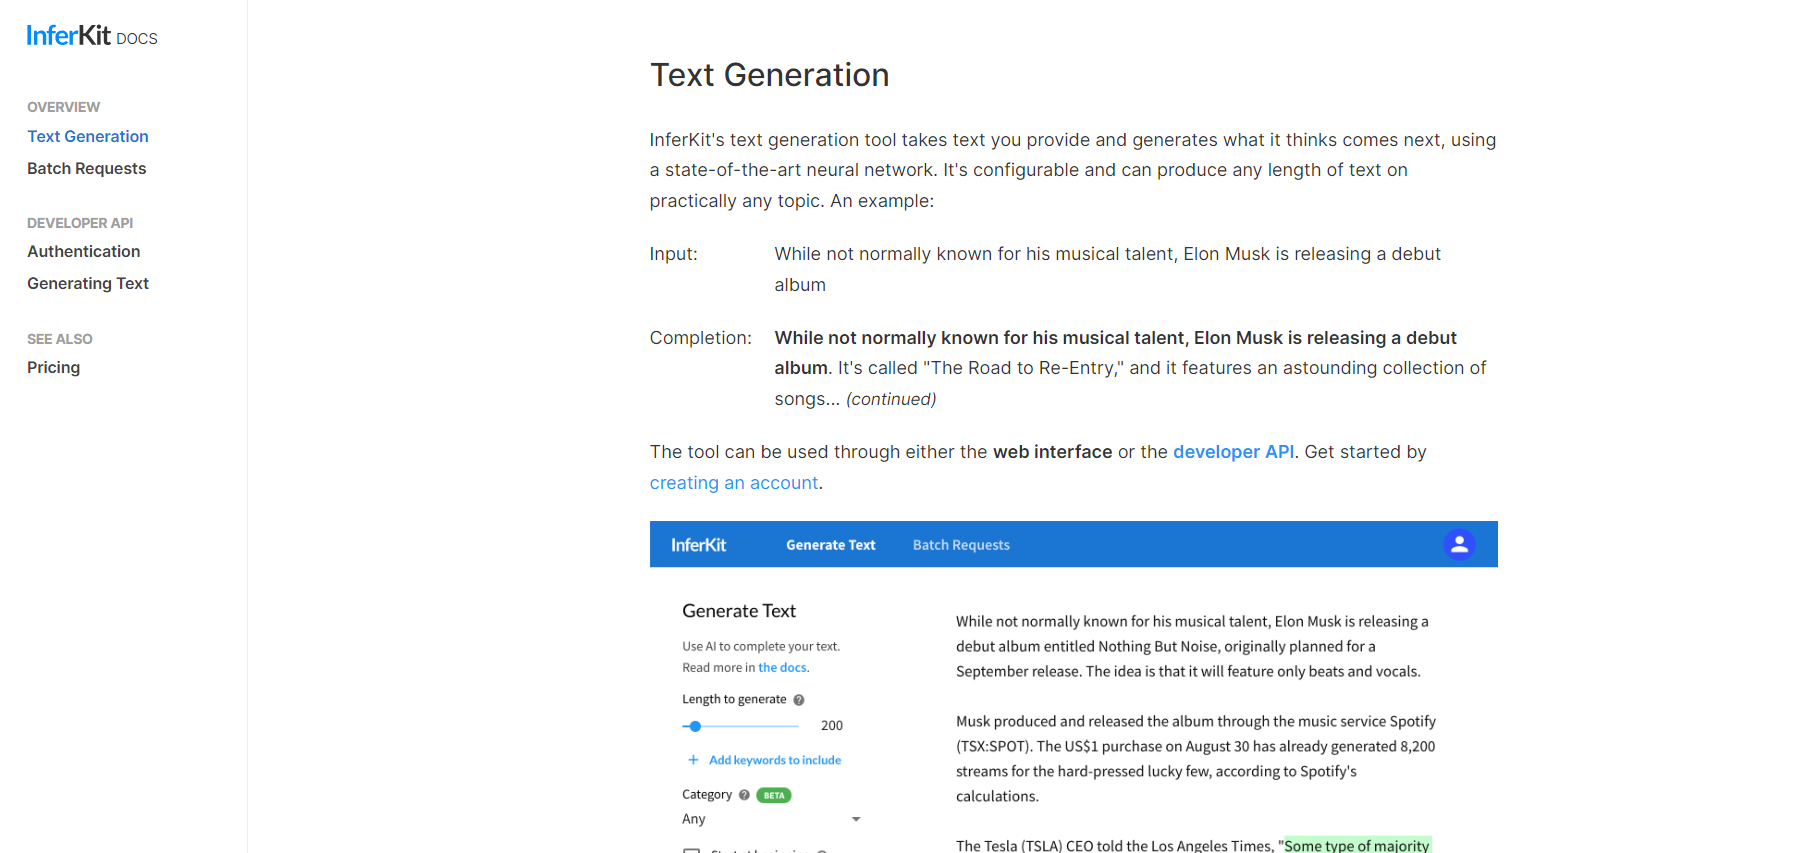 How InferKit's web interface works for text generation.